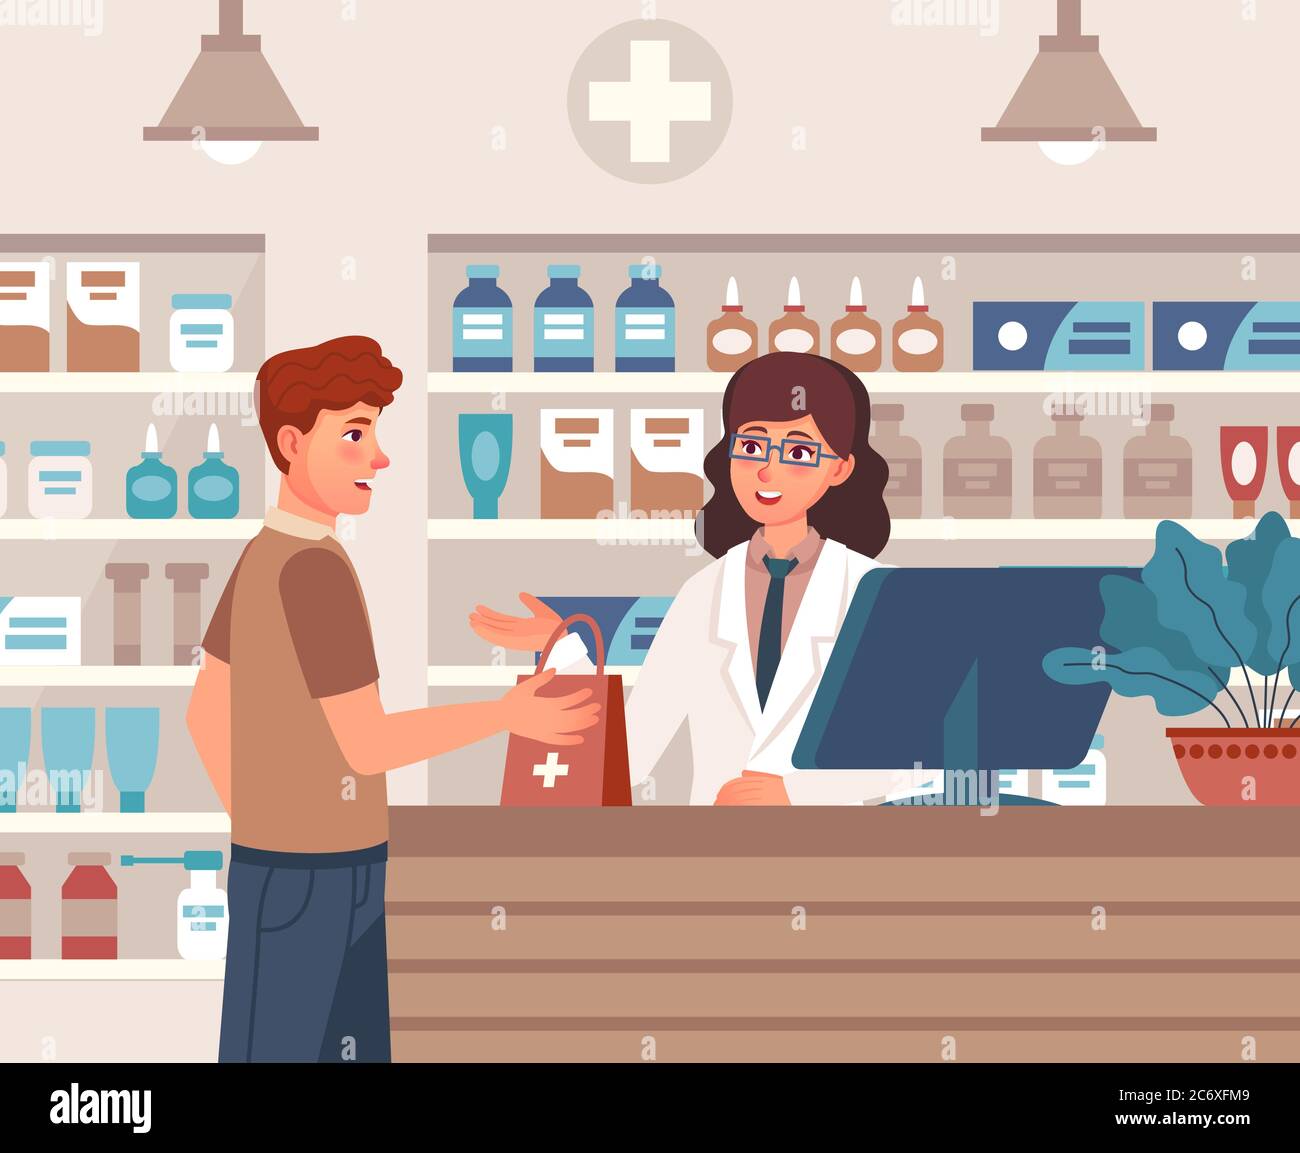 Pharmacist and patient. Pharmacist consultant and patient in drugstore interior, client buys medication, pharma healthcare vector concept Stock Vector